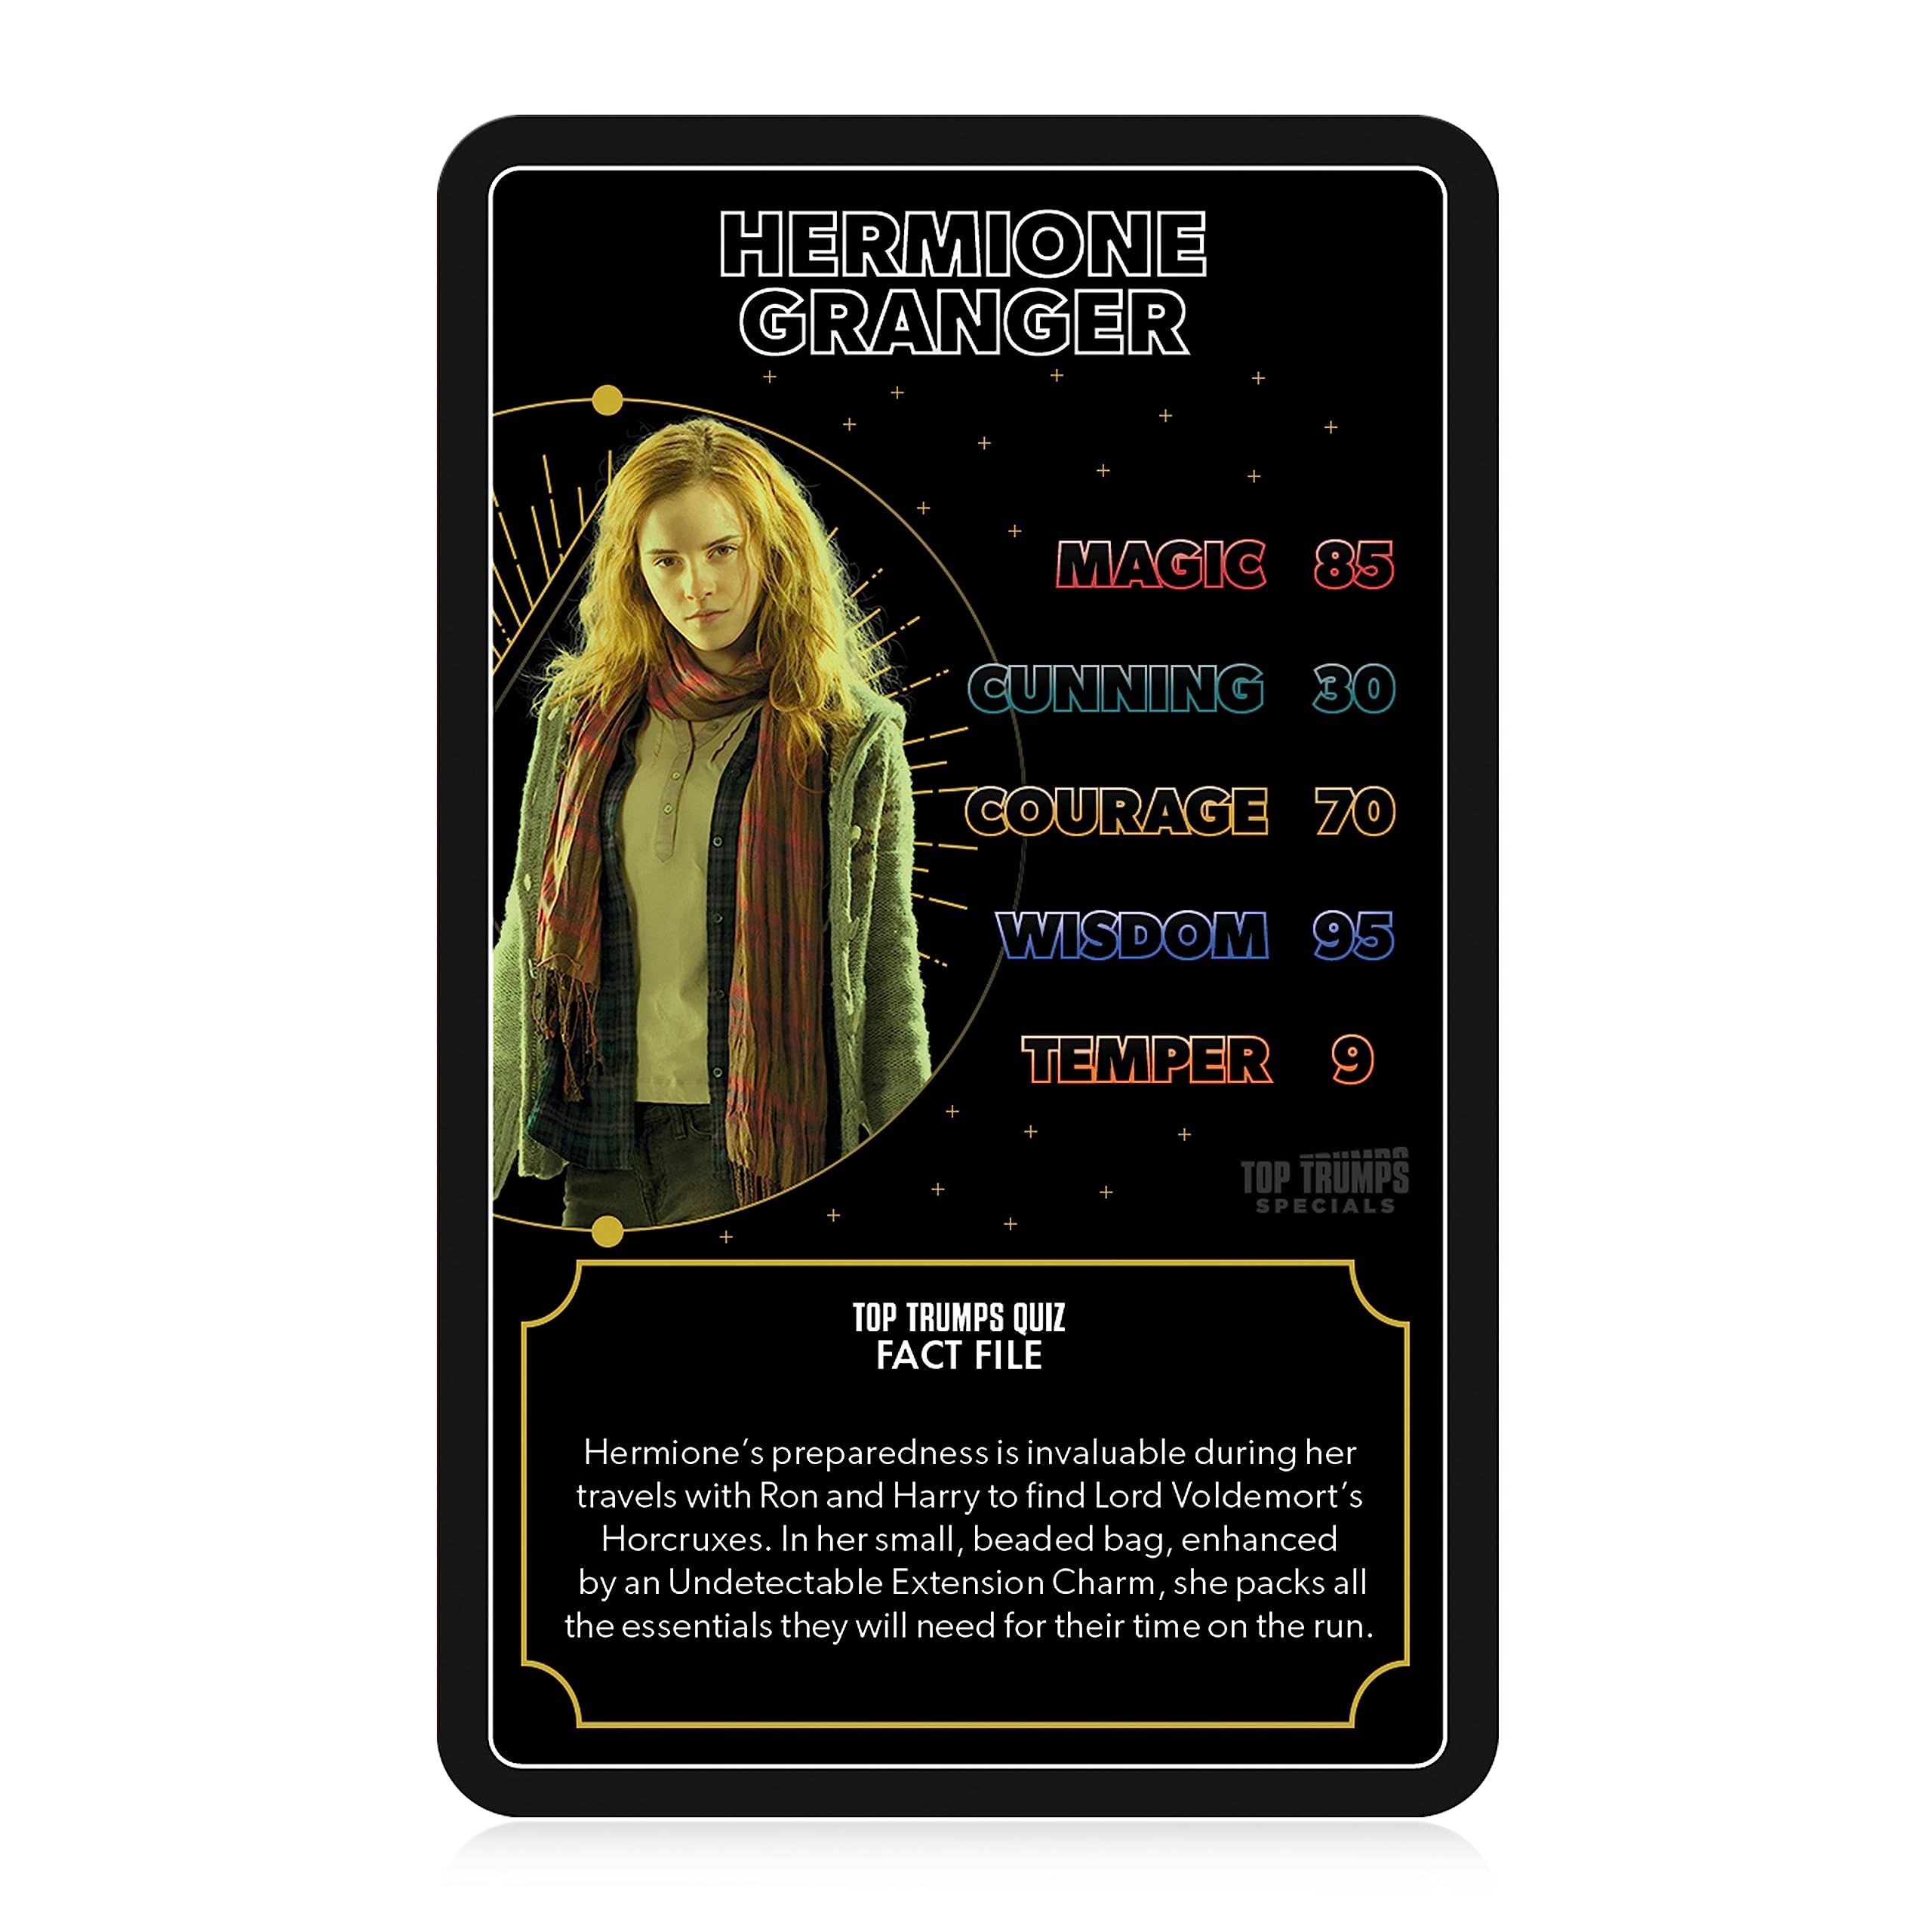 Harry Potter Heroes of Hogwarts Top Trumps Card Game; Officially Licensed Merchandise with Your Favorite Wizards | Family Fun for Ages 6 & up